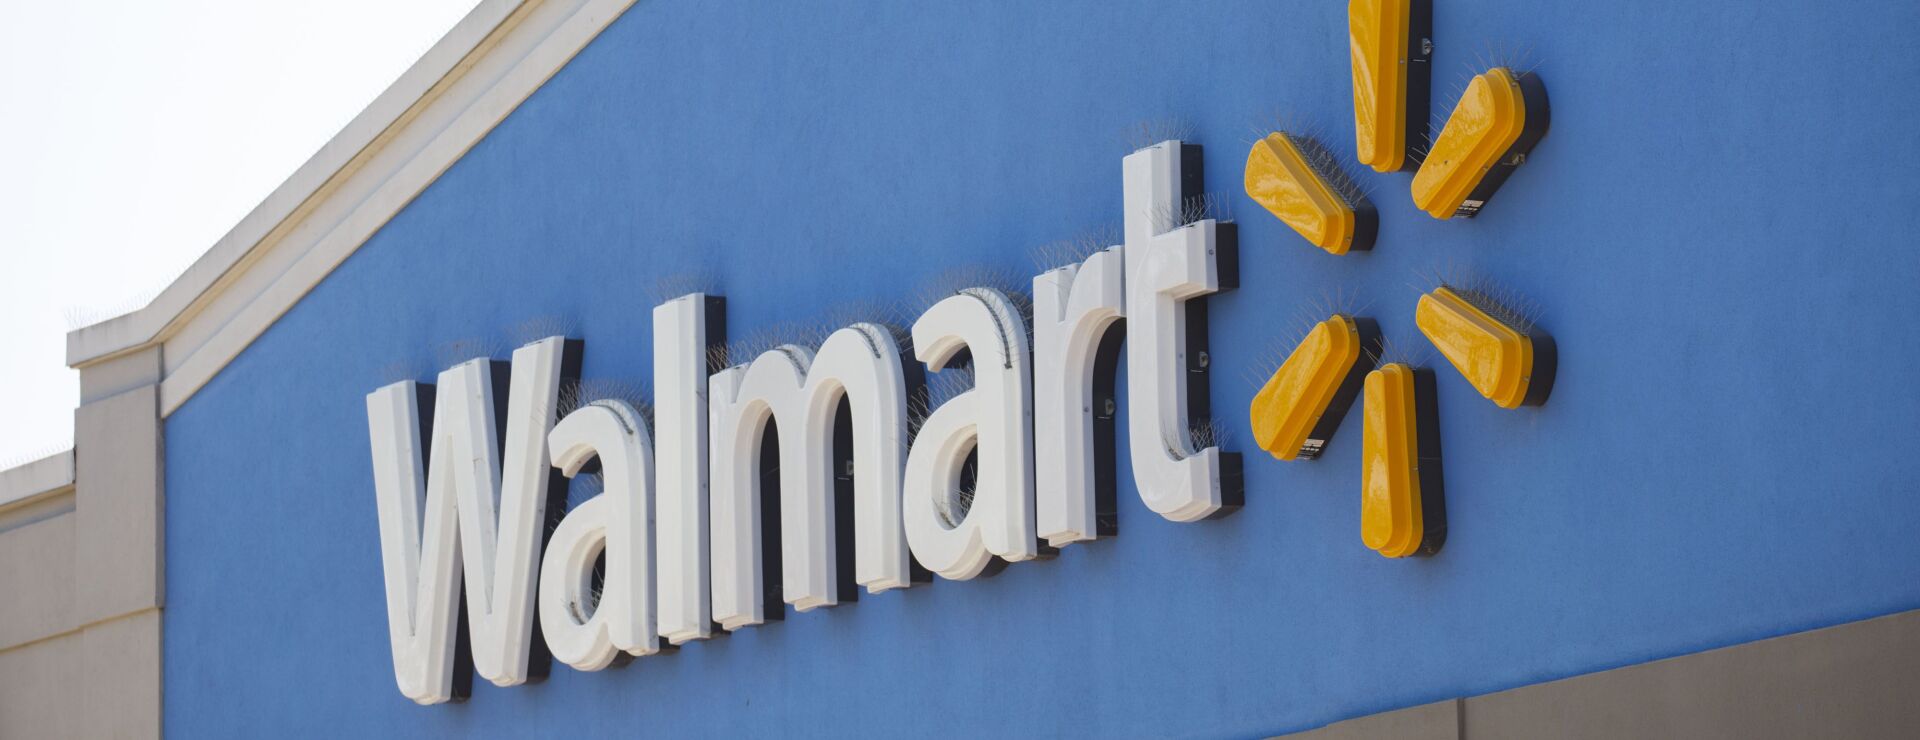 An Employee at Walmart Plundered Their Coworkers by Breaching the Payroll Service